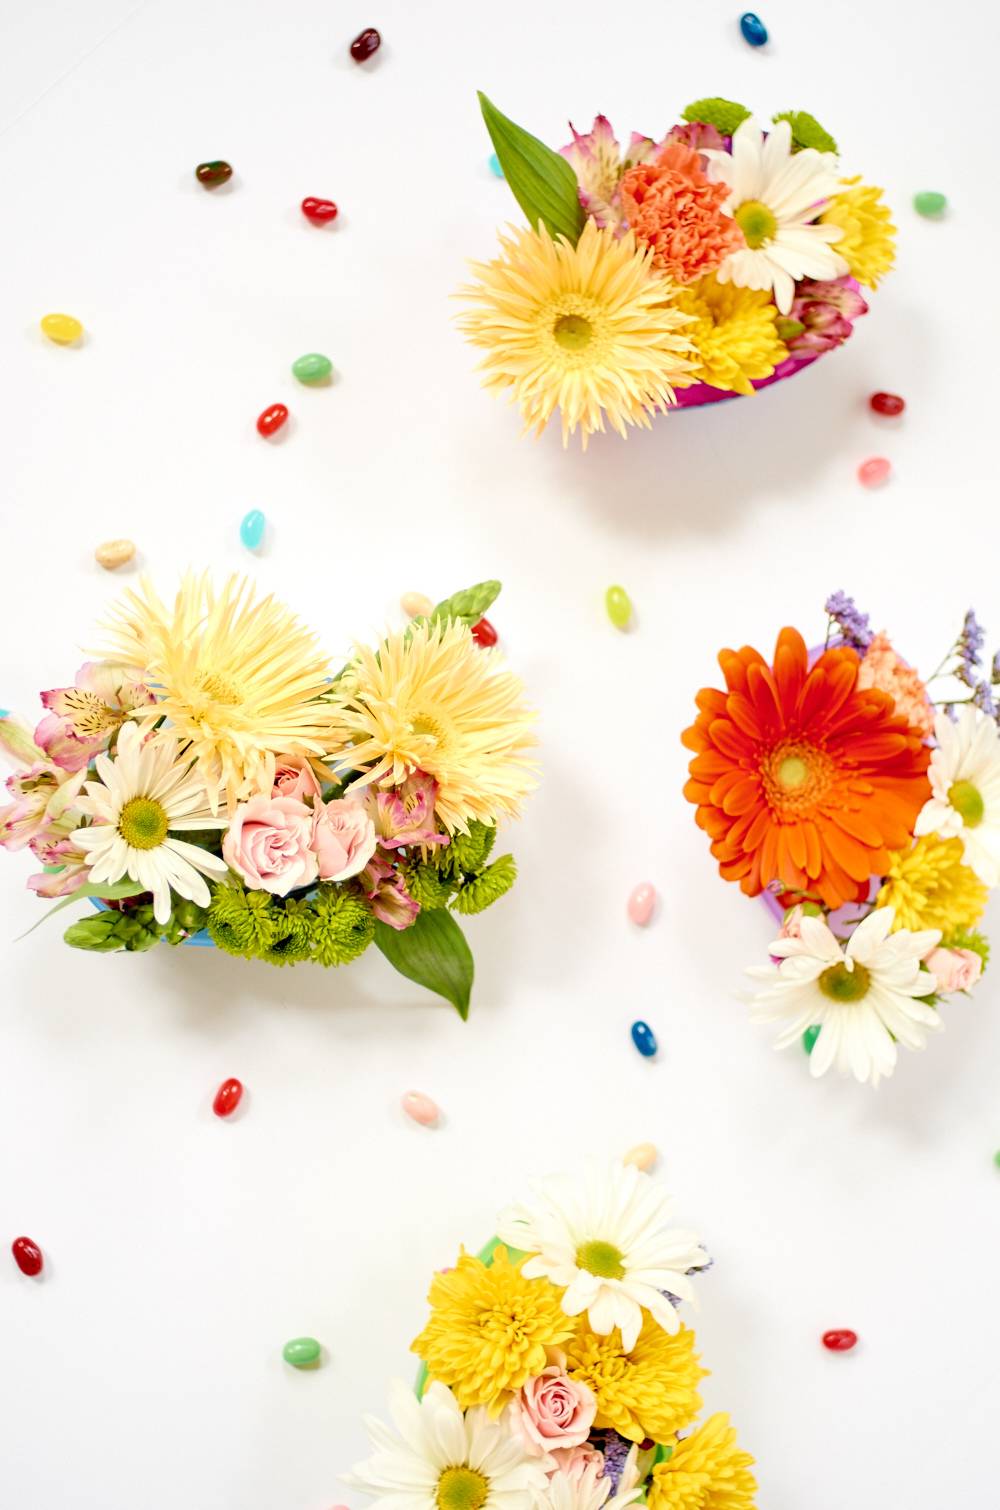 Flowers sit on a white surface with colorful petals.